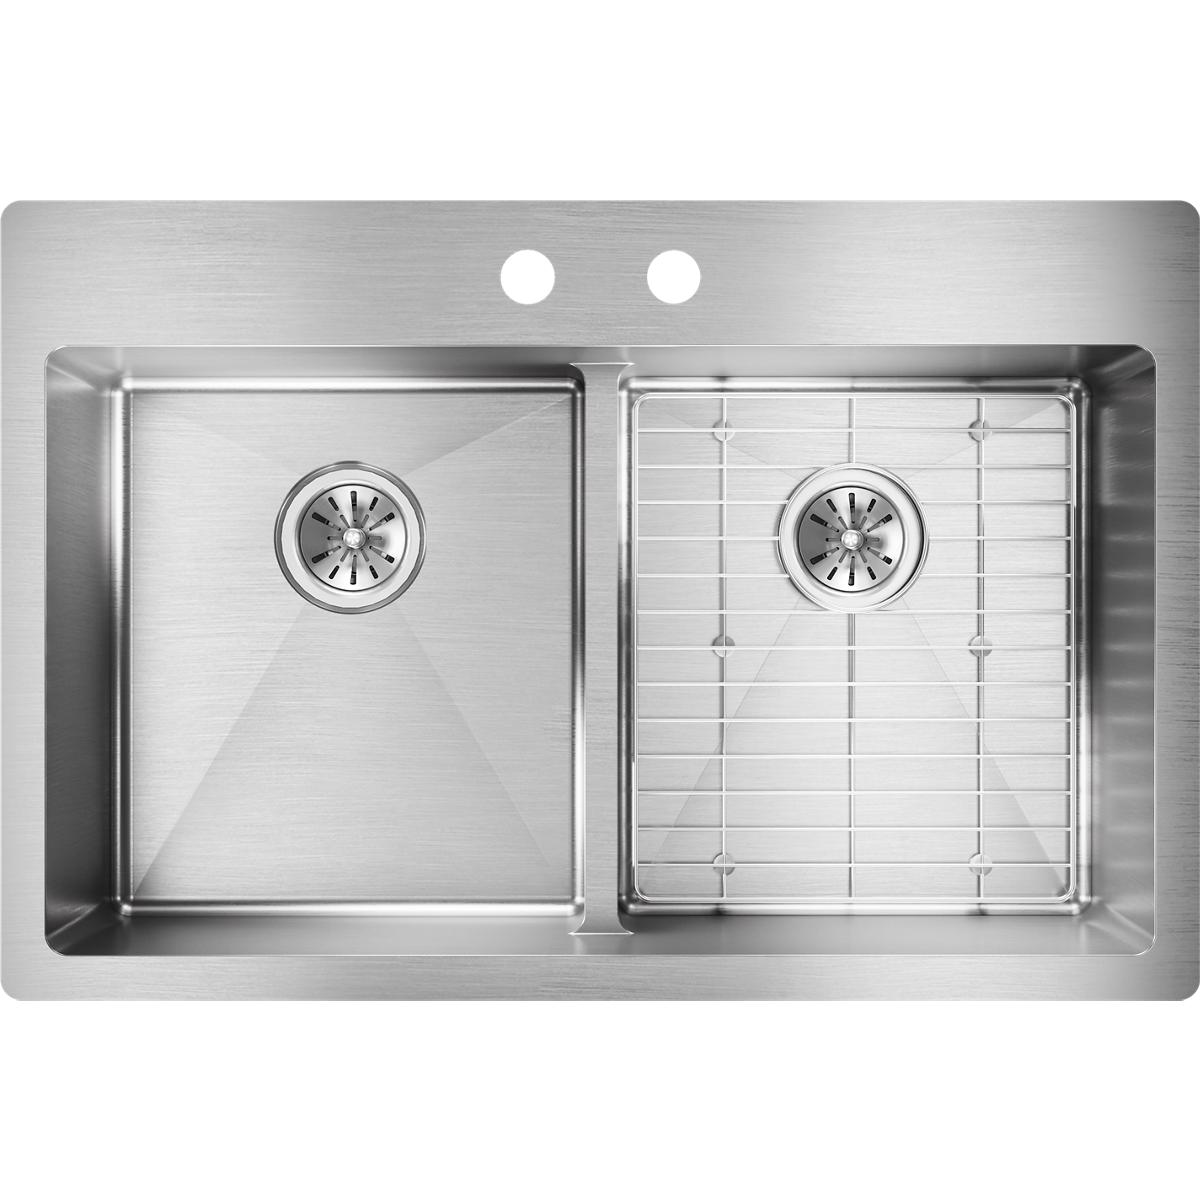 Elkay Crosstown 33" x 22" x 9" Stainless Steel Equal Double Bowl Dual Mount Sink Kit with Aqua Divide